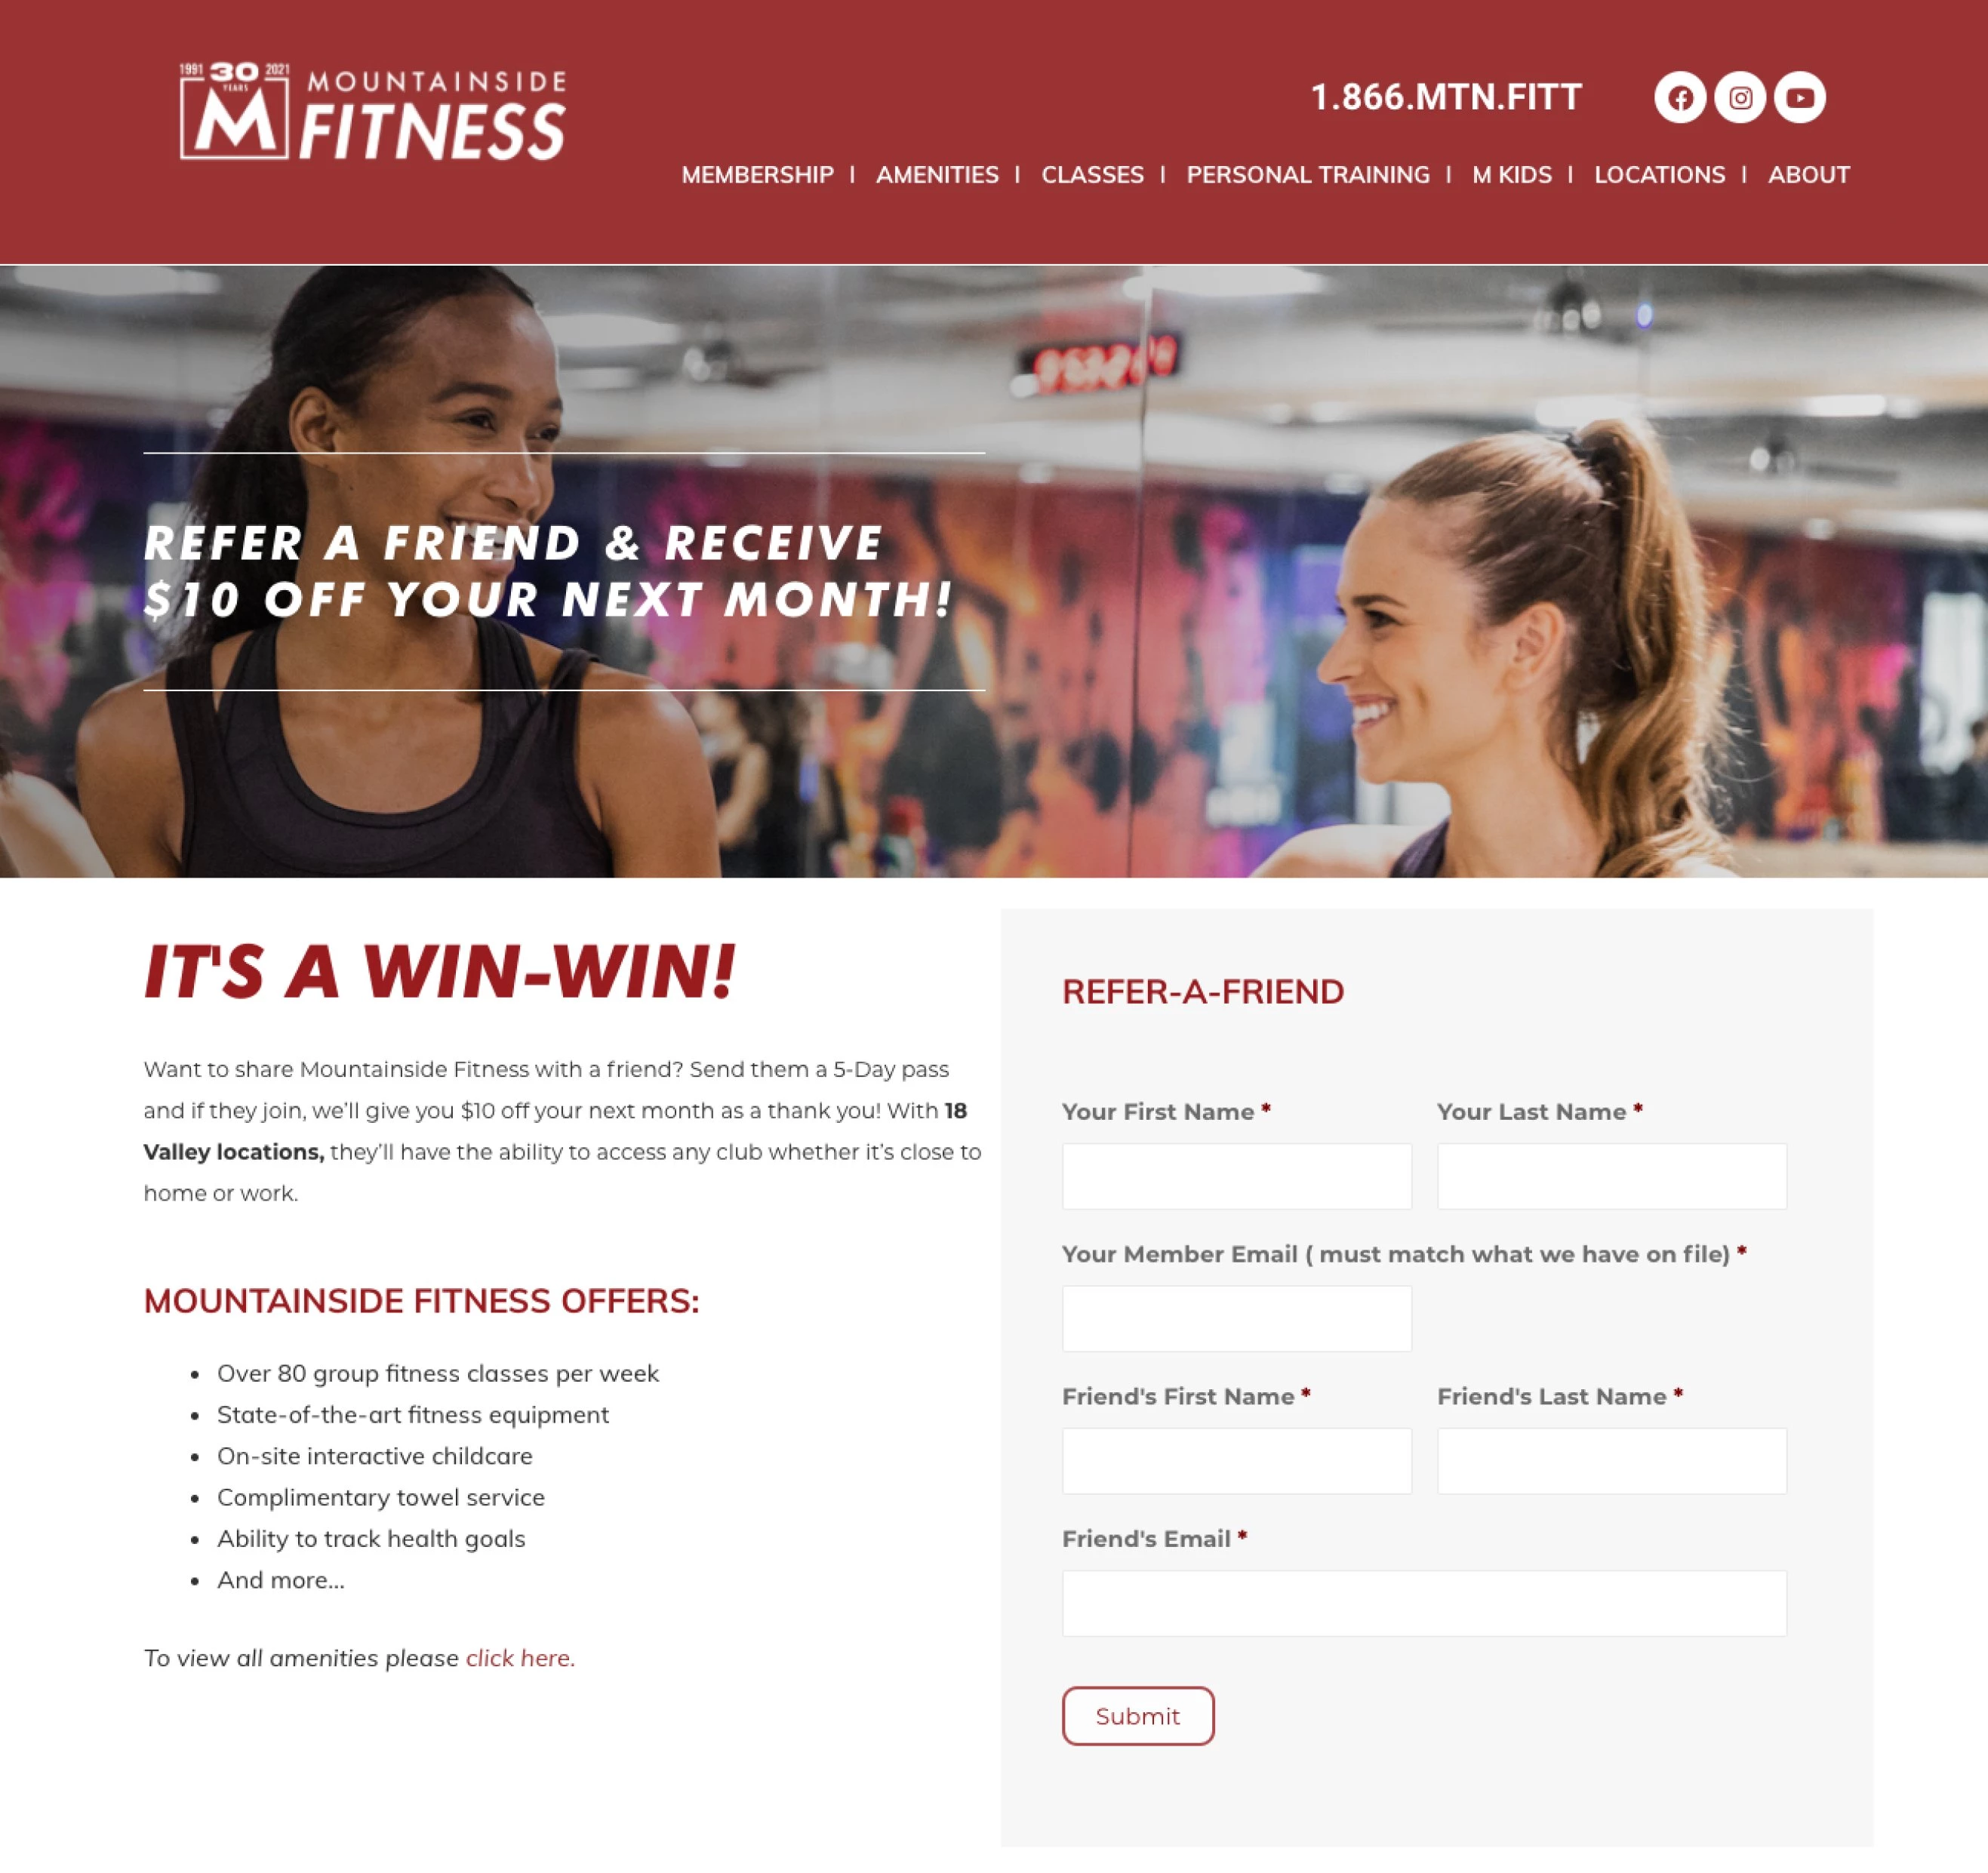 Mountainside Fitness refer a friend signup form on landing page